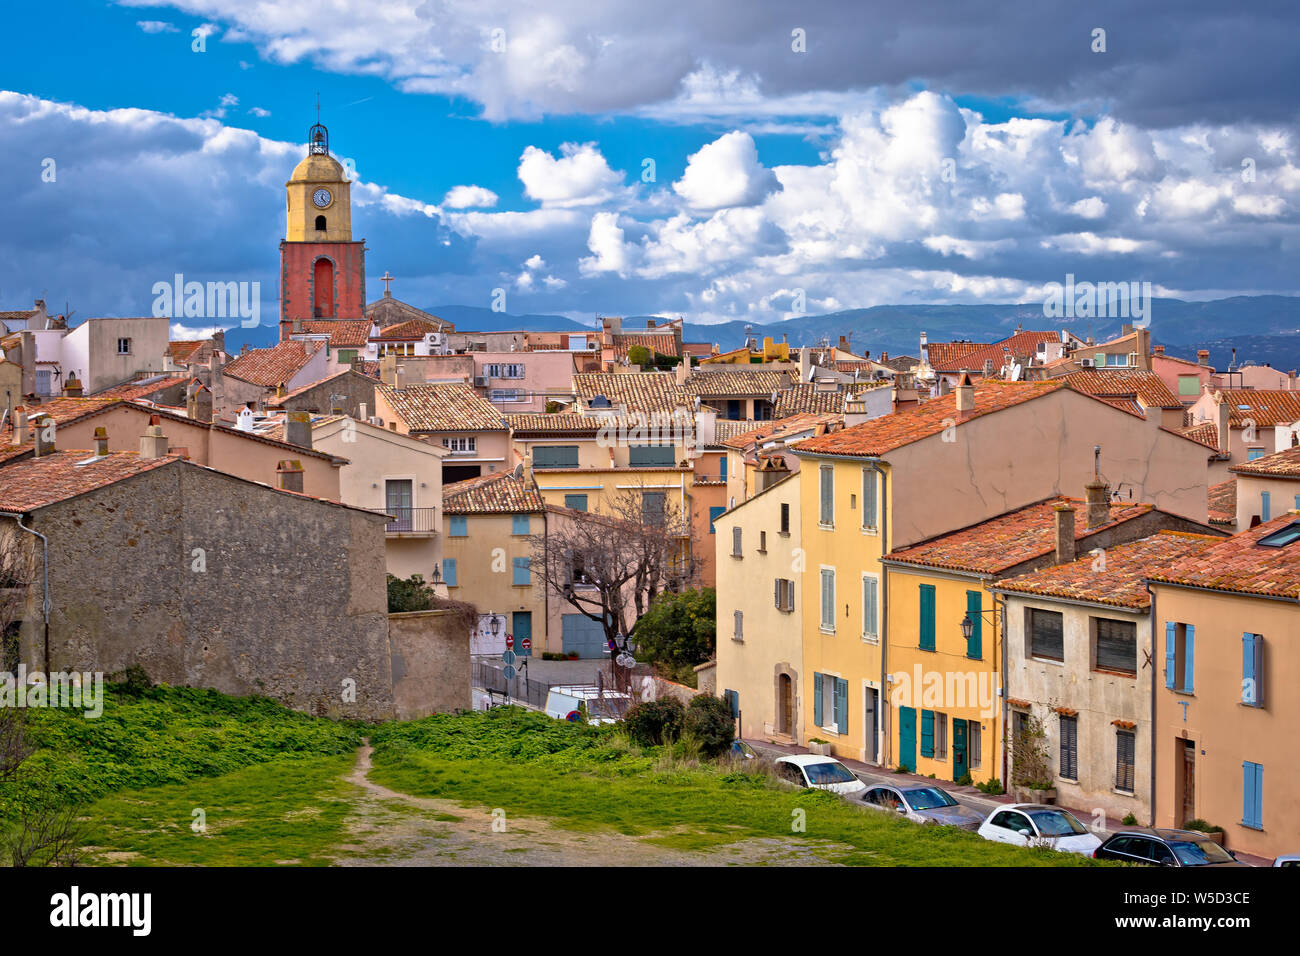 Saint Tropez village church tower and old rooftops view, famous tourist destination on Cote d Azur, Alpes-Maritimes department in southern France Stock Photo